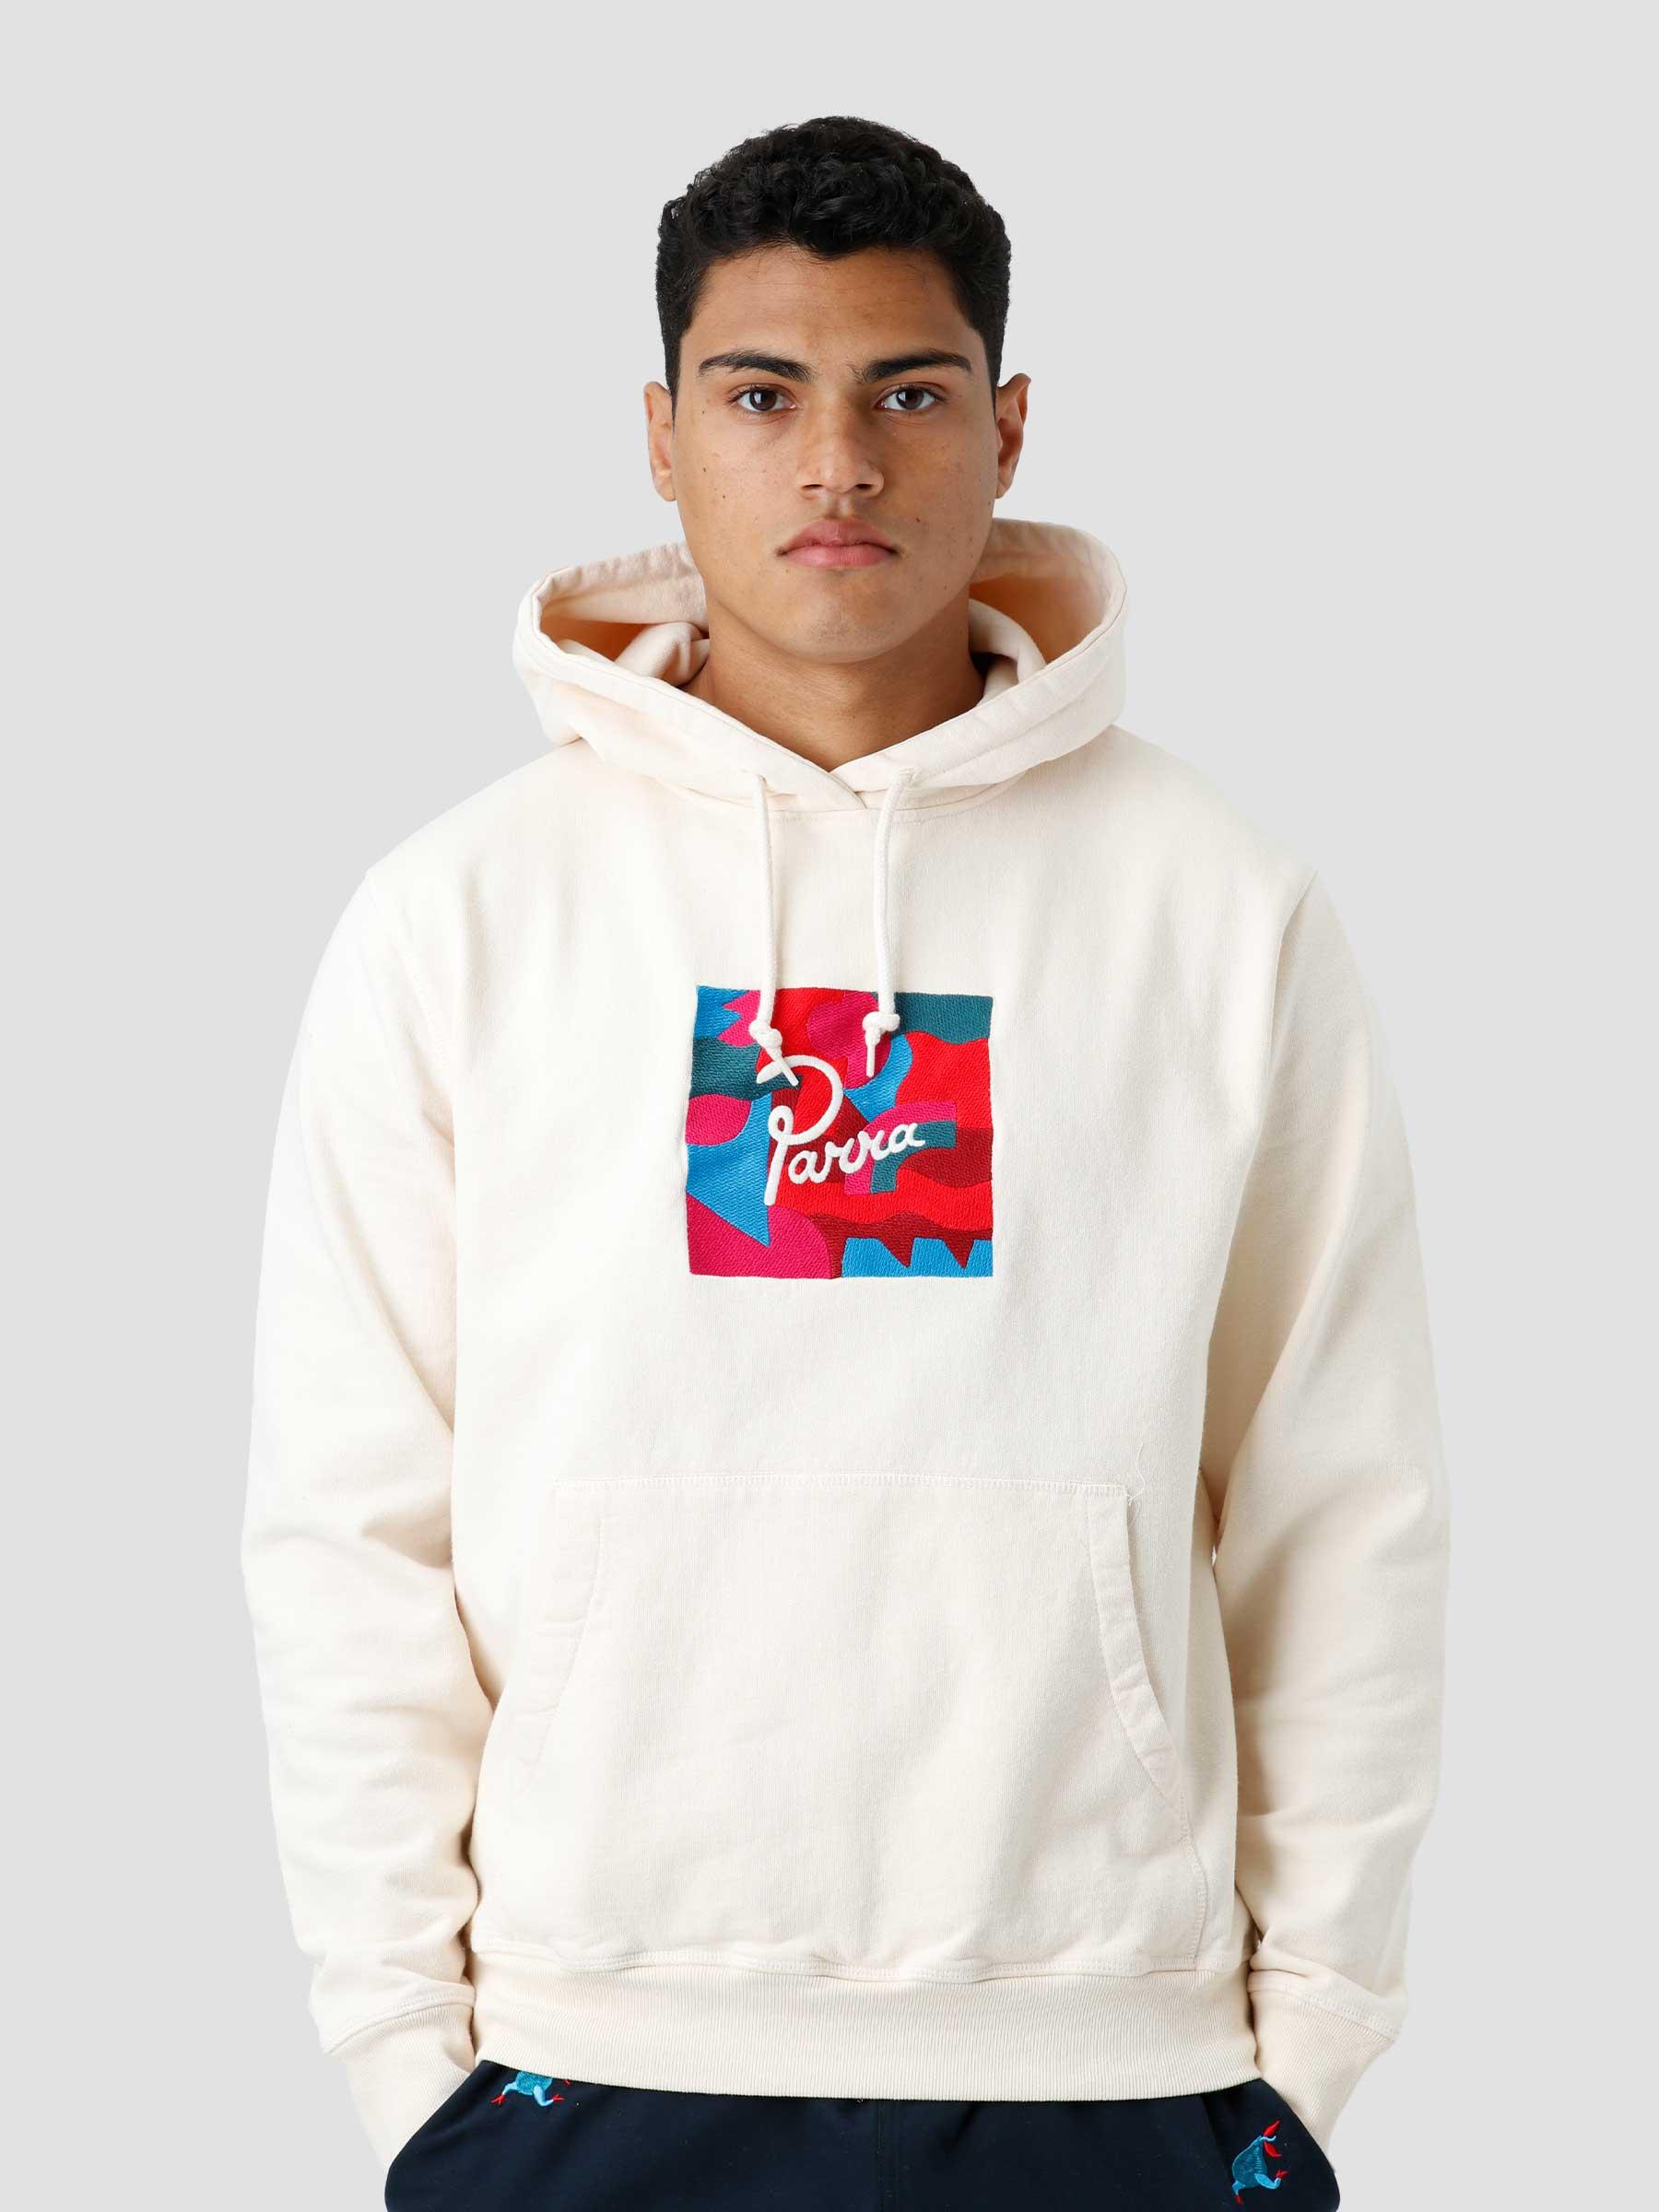 Abstract Shapes Hooded Sweatshirt White 47425